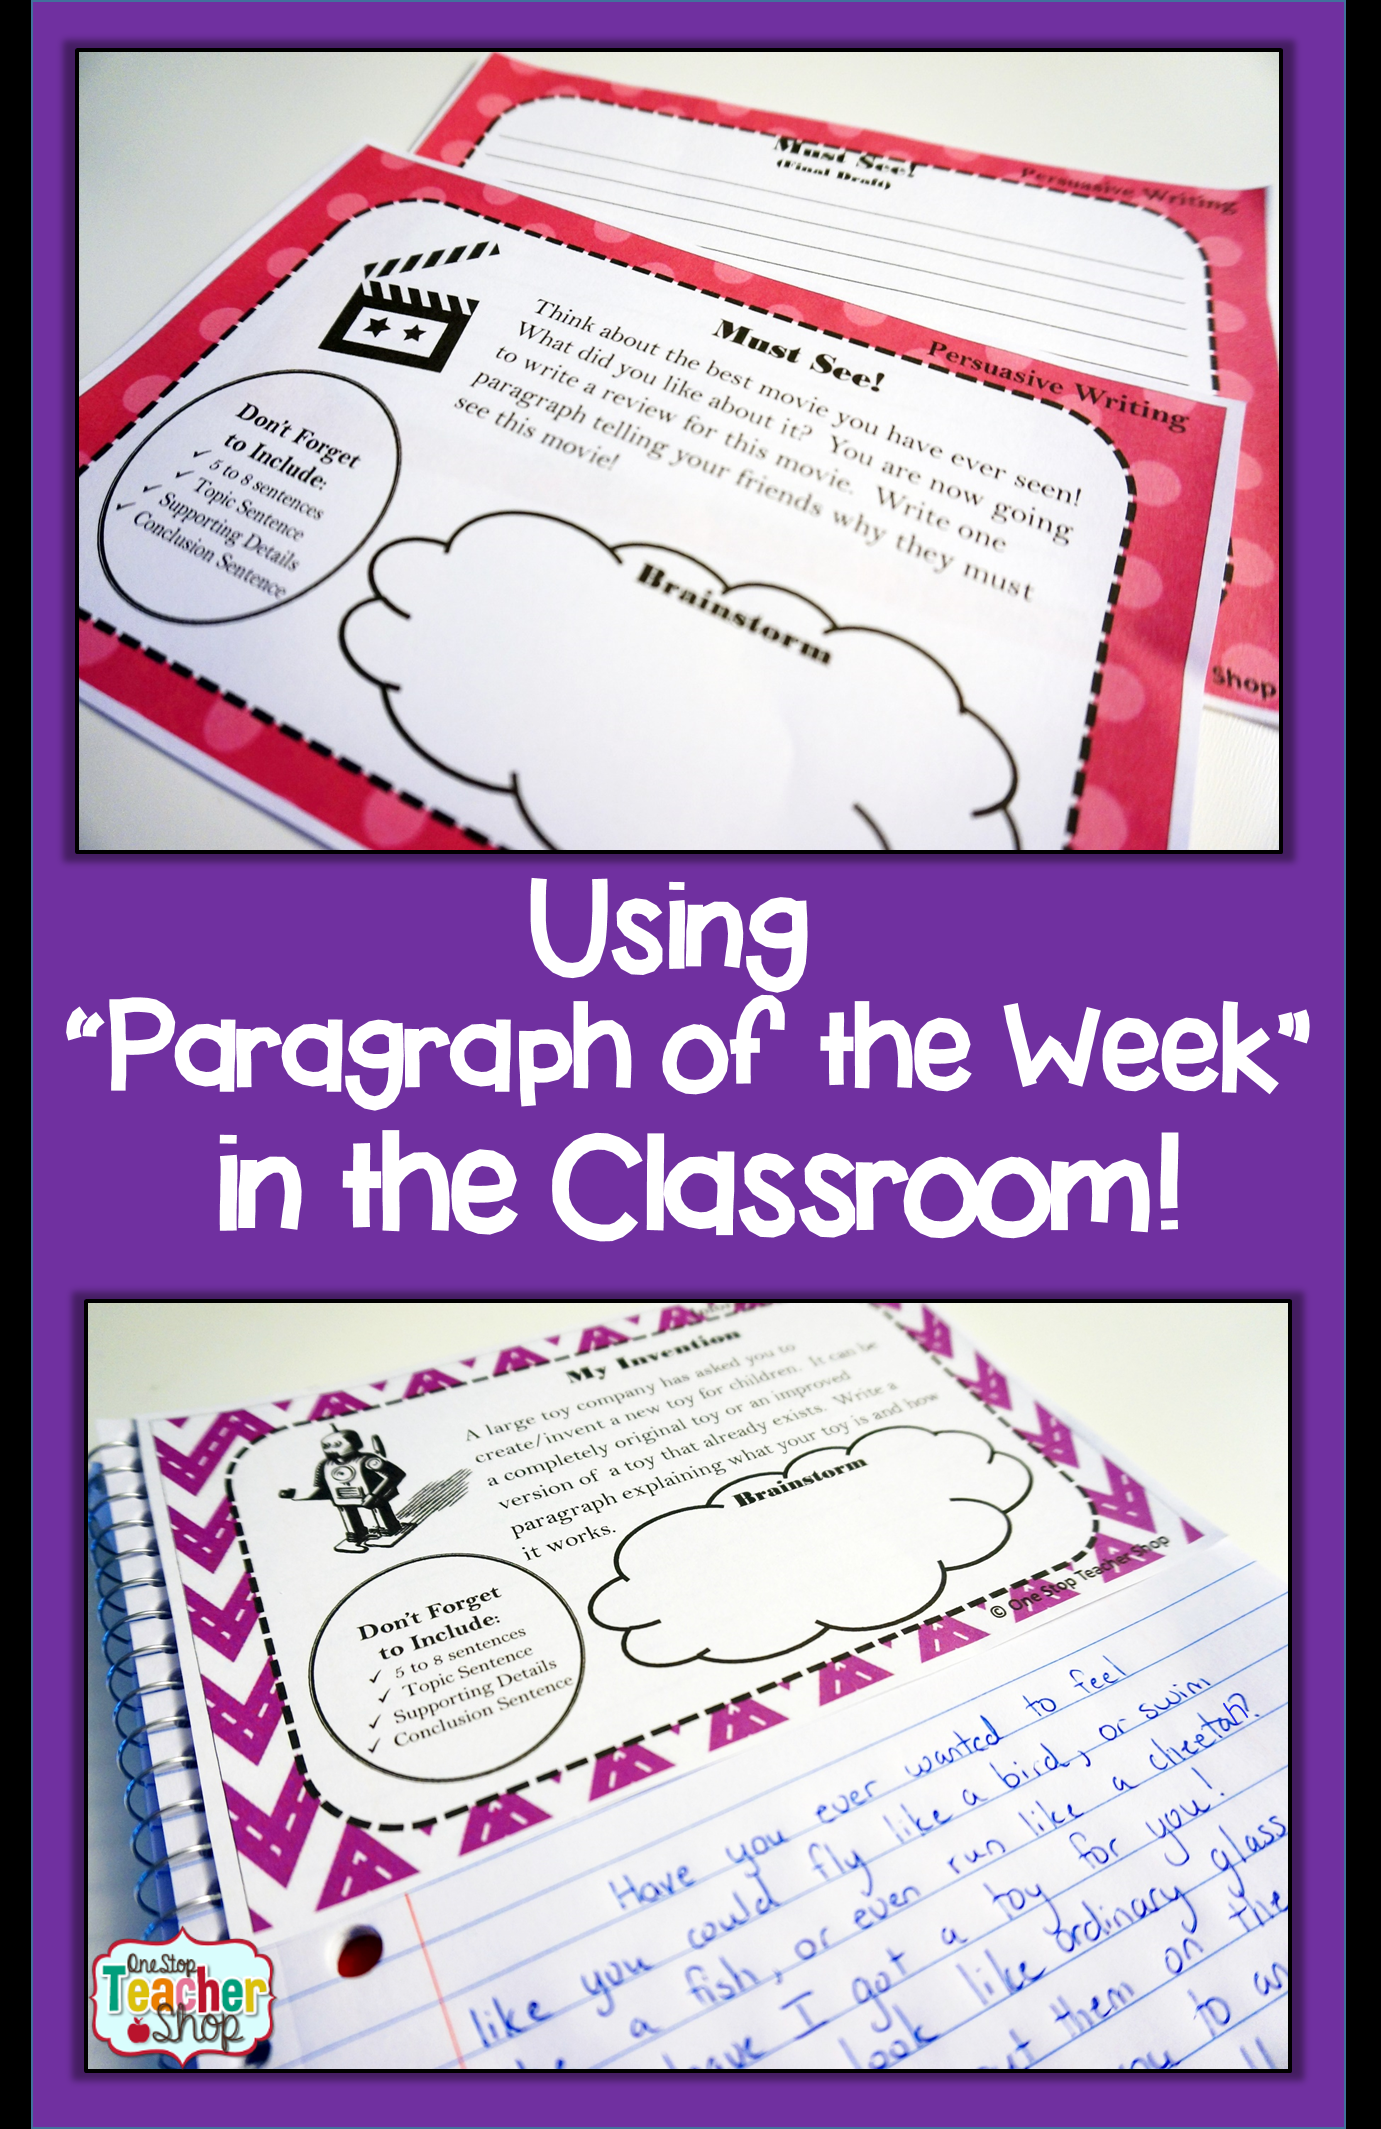 Read about how “Paragraph o